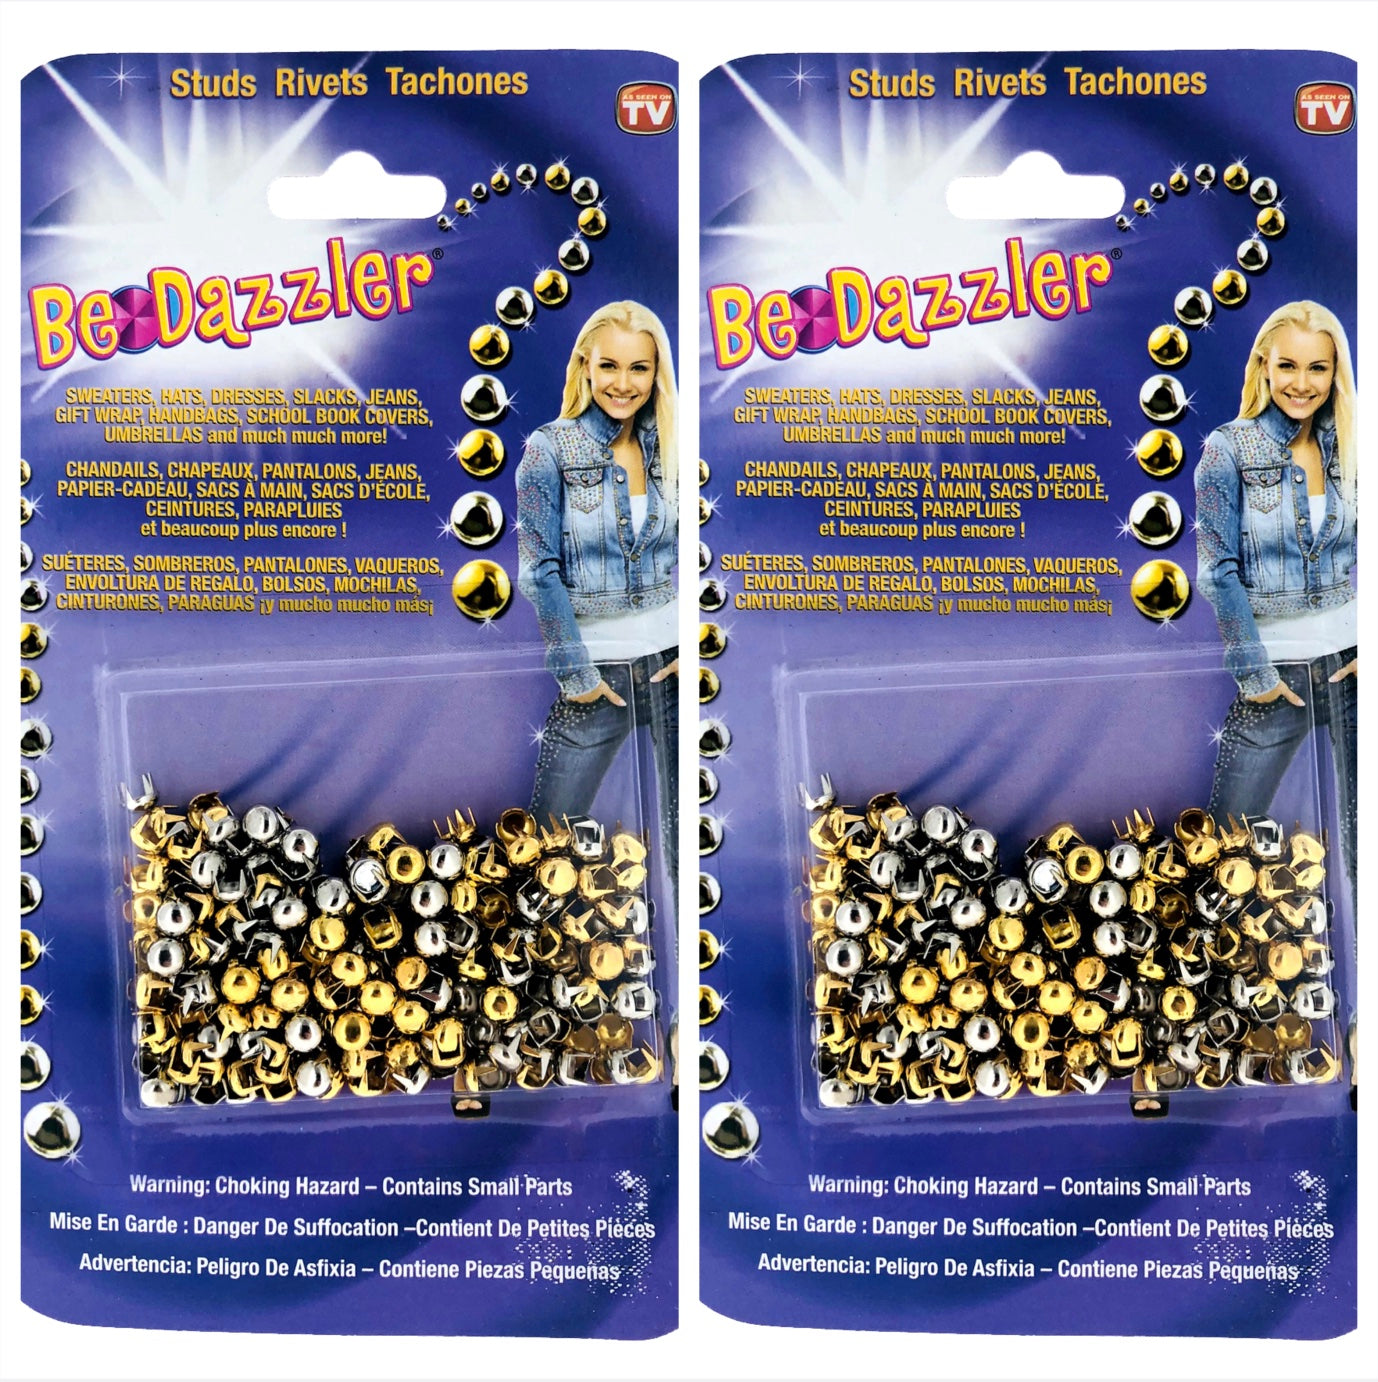 BeDazzler, Other, The Original Bedazzler Rhinestone Stud Setting Machine  From The 9s